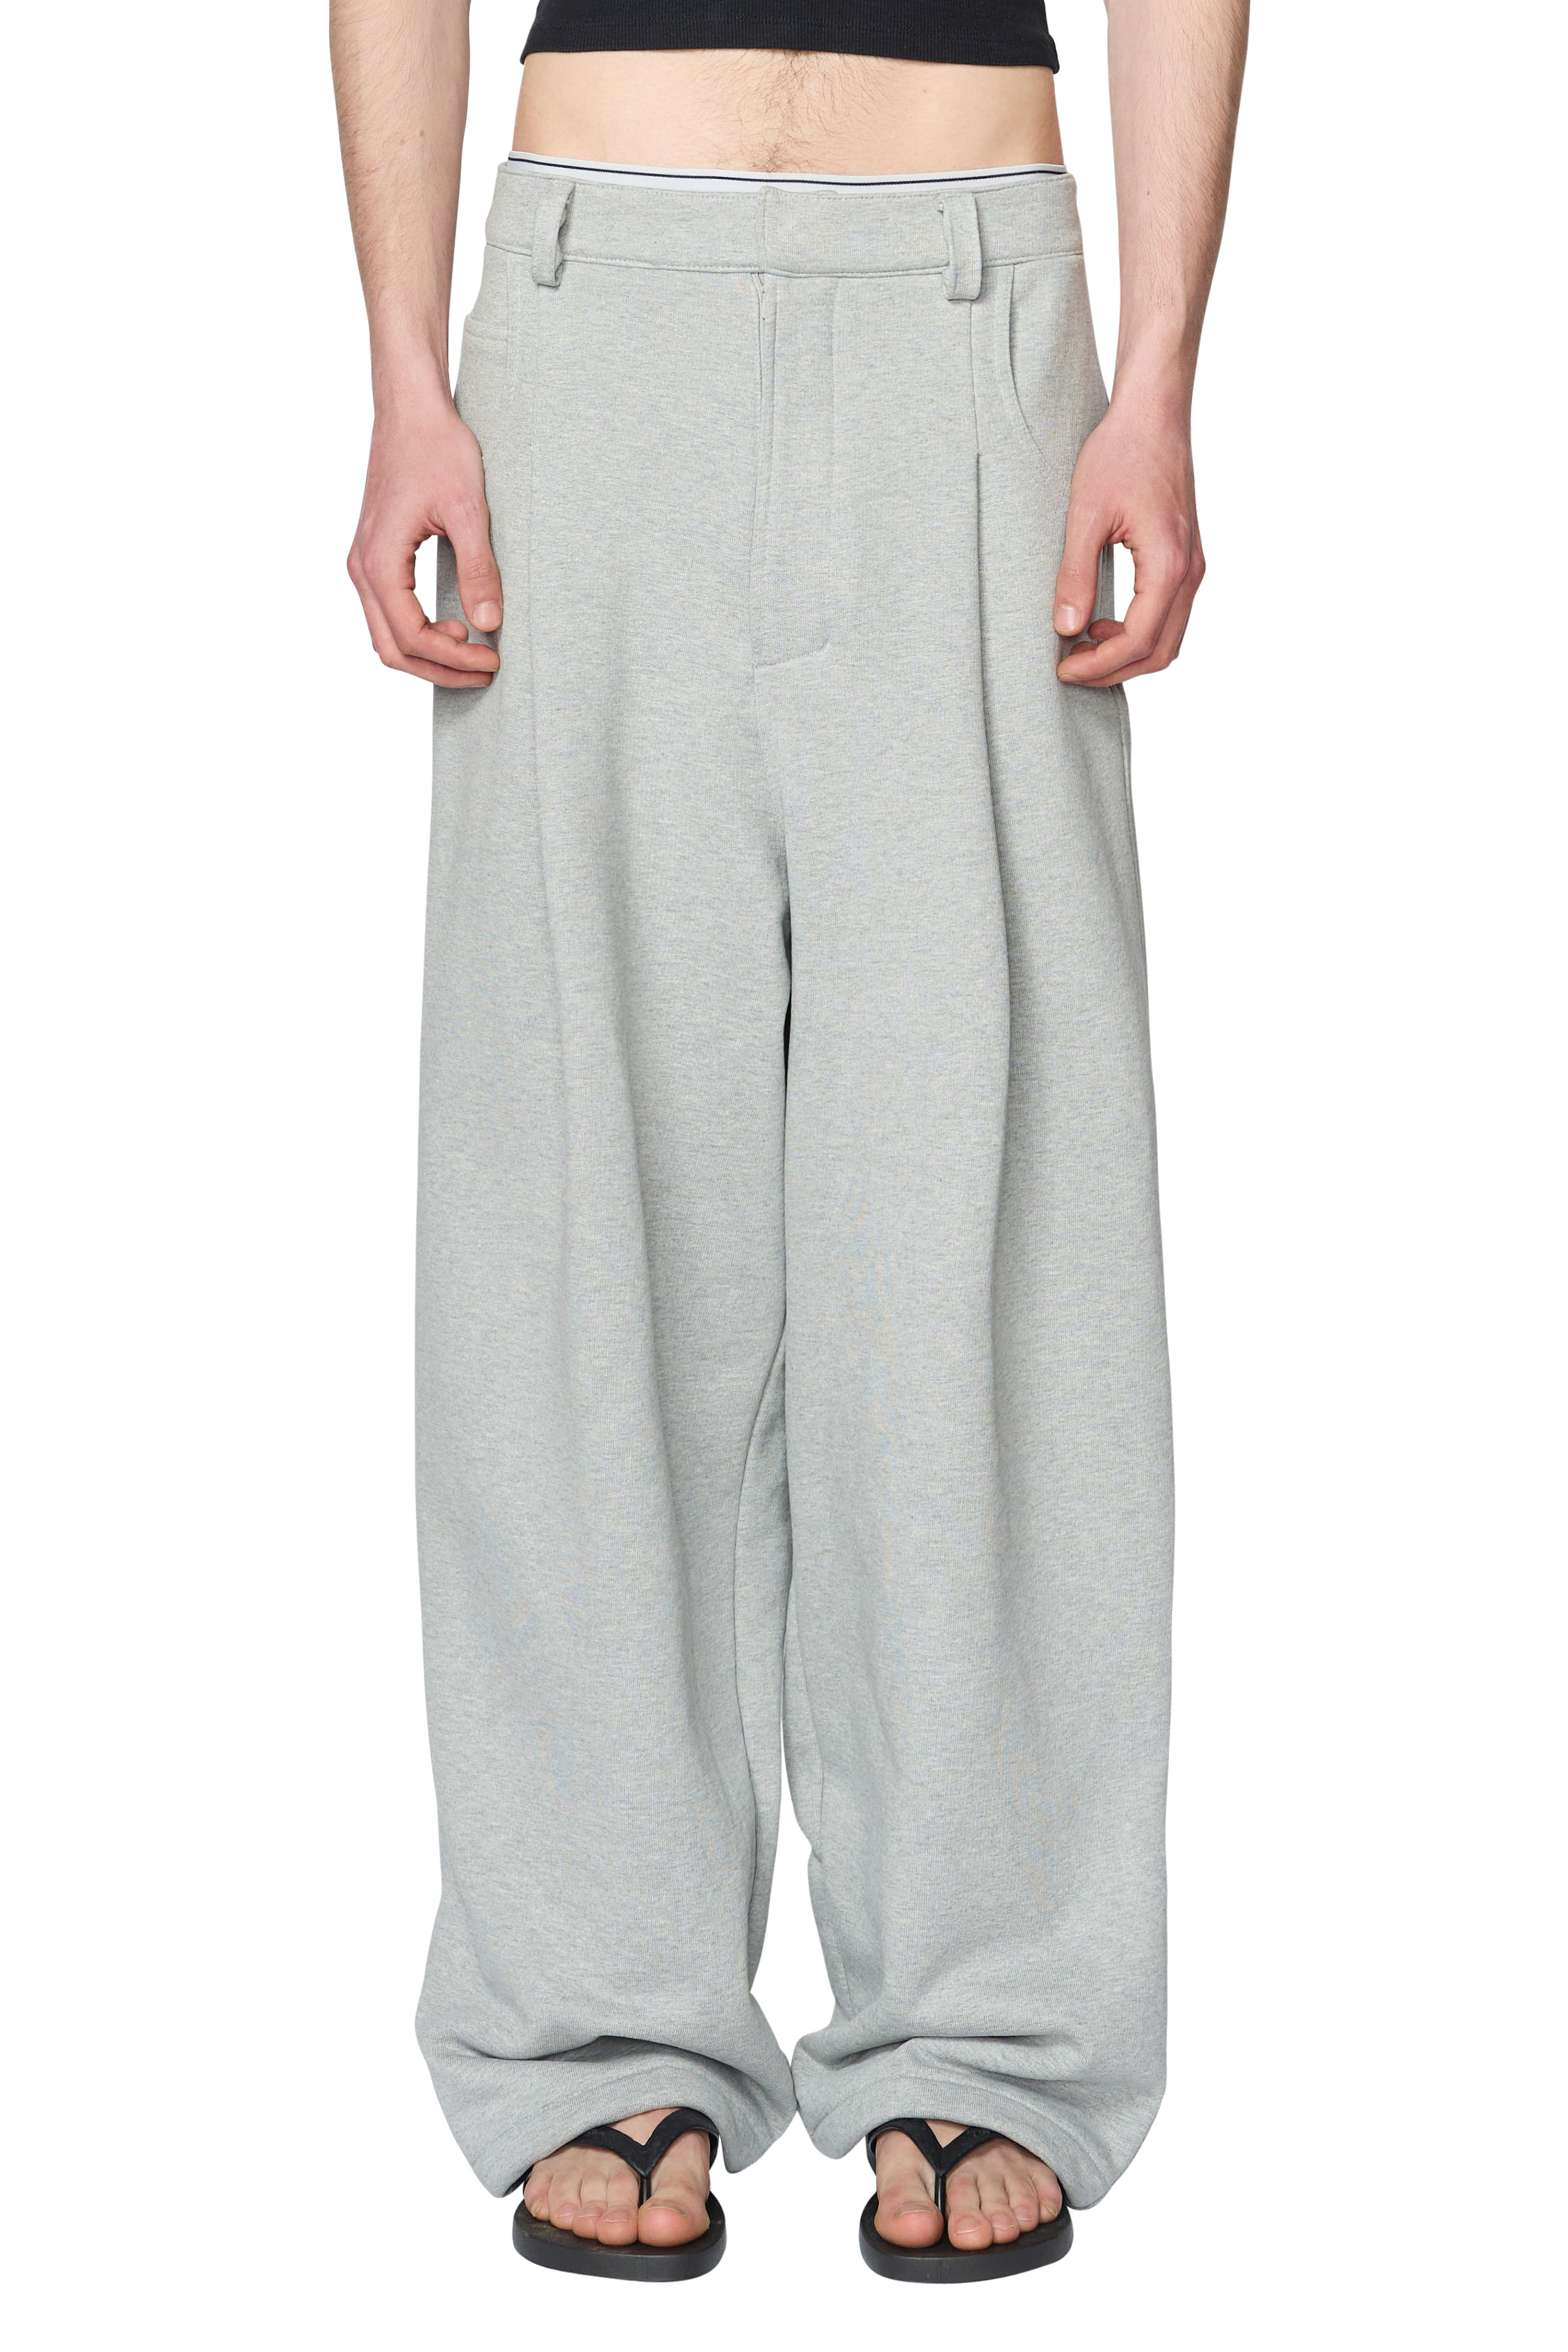 [ Delivery from 5/1 ] GRAY TUCKED SWEATPANTS